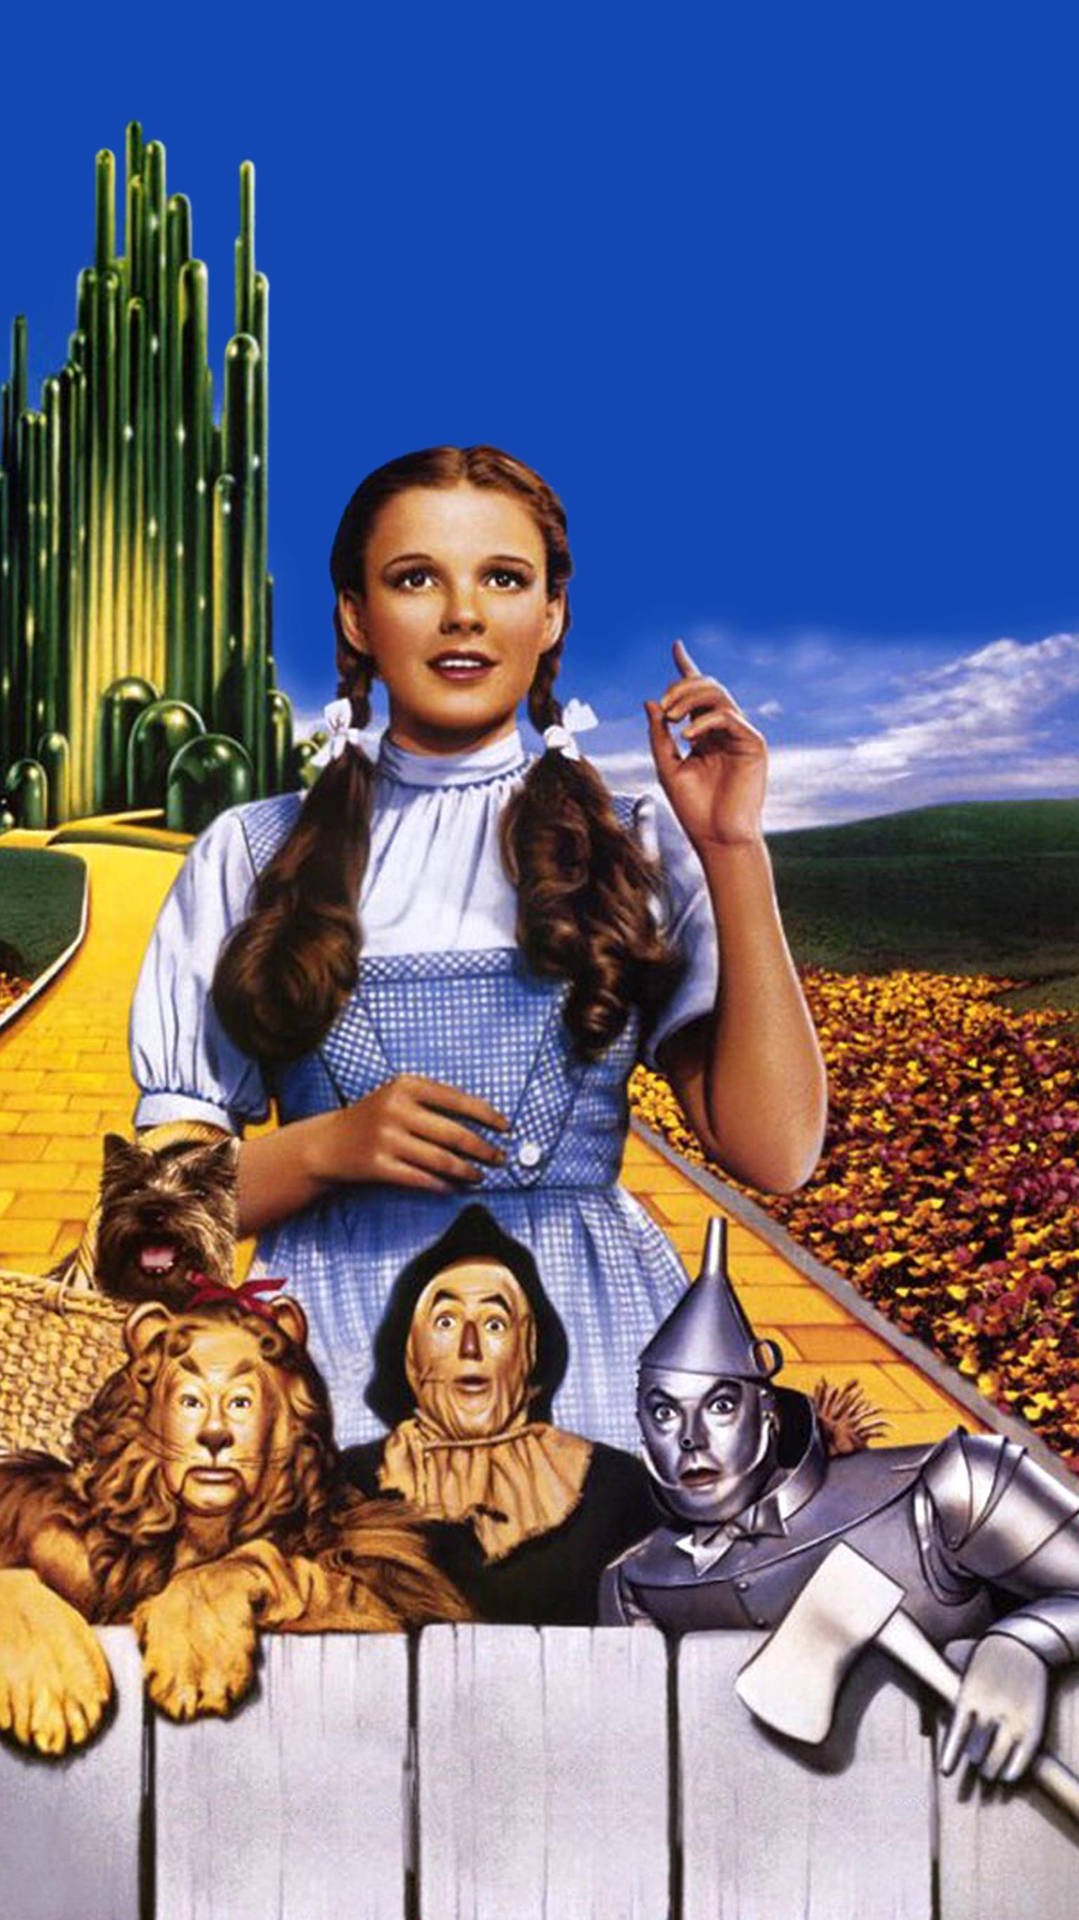 Download The Wizard Of Oz Squad Behind Fence Wallpaper